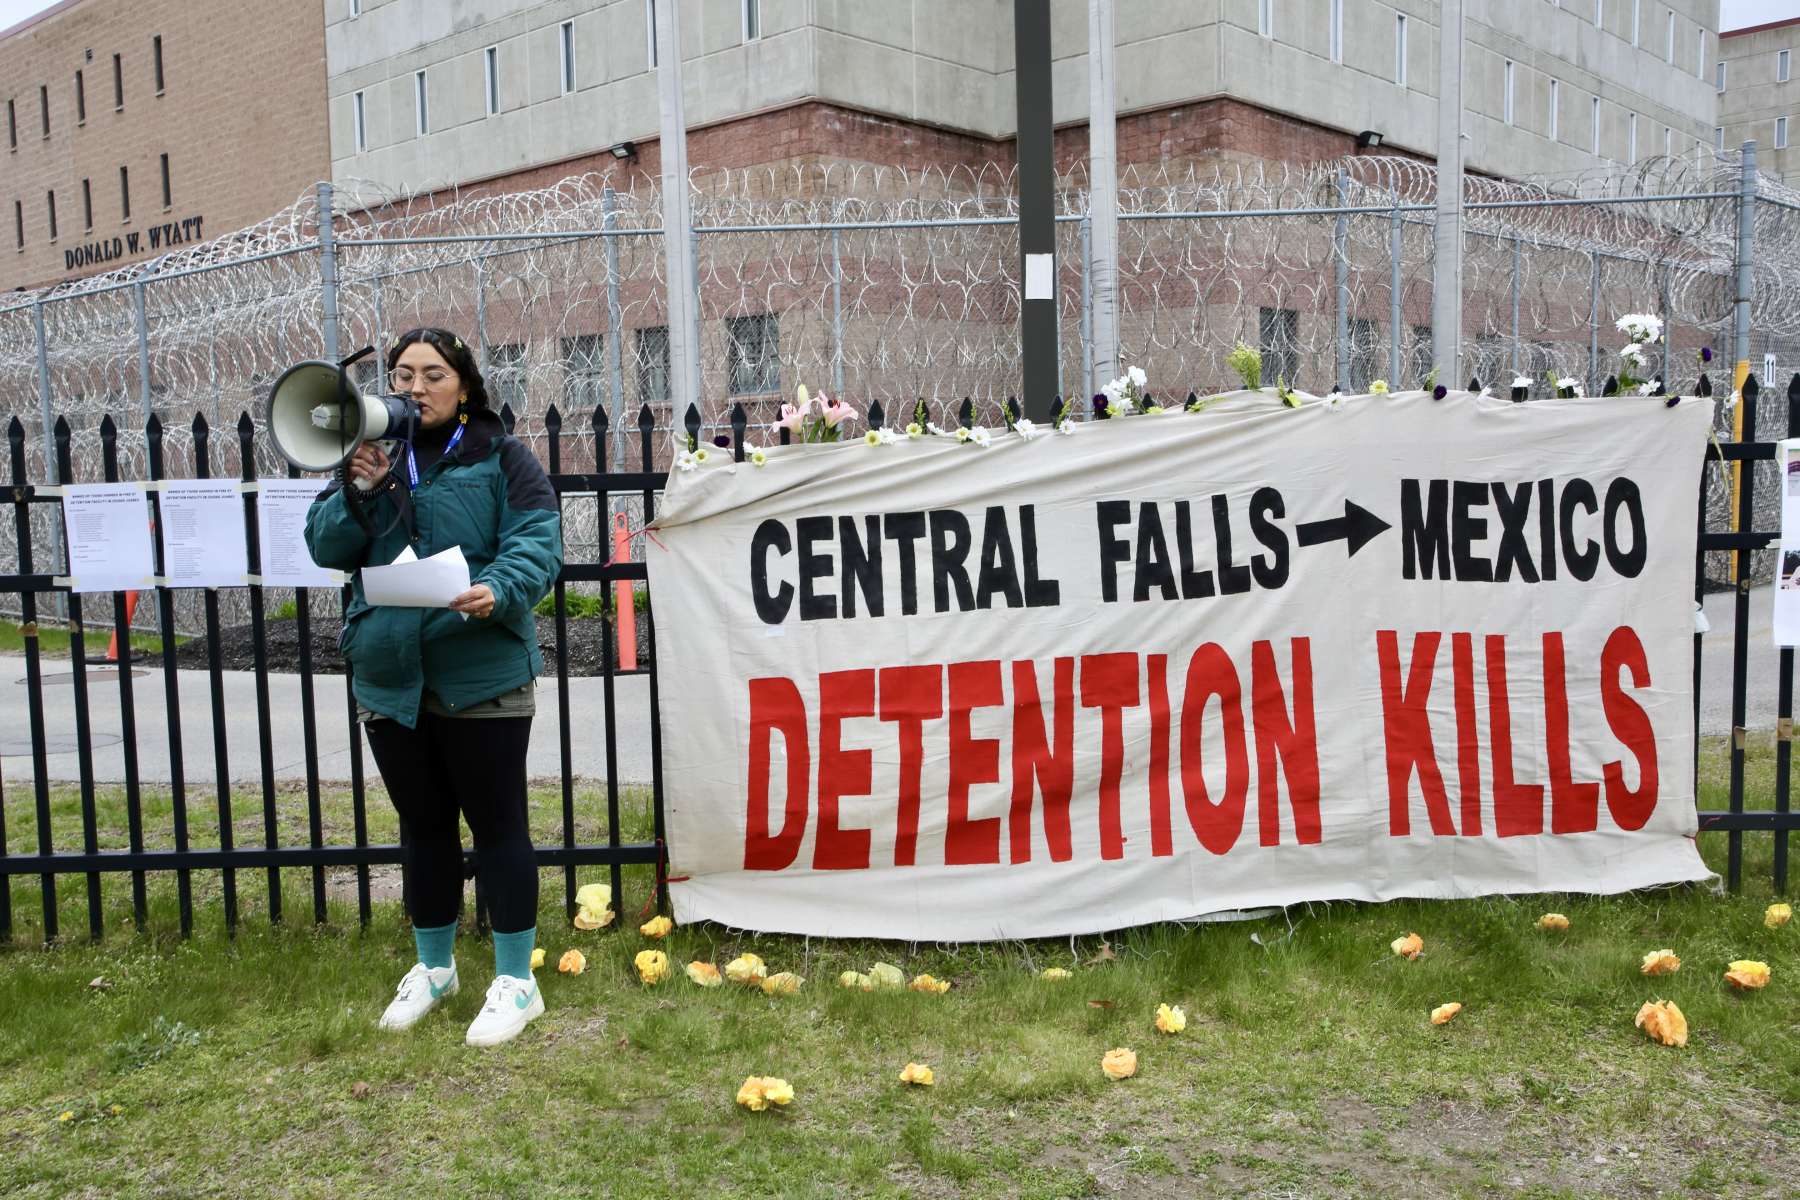 Vigil Outside Wyatt Detention Facility Honors Lives Lost in Detention and Incarceration